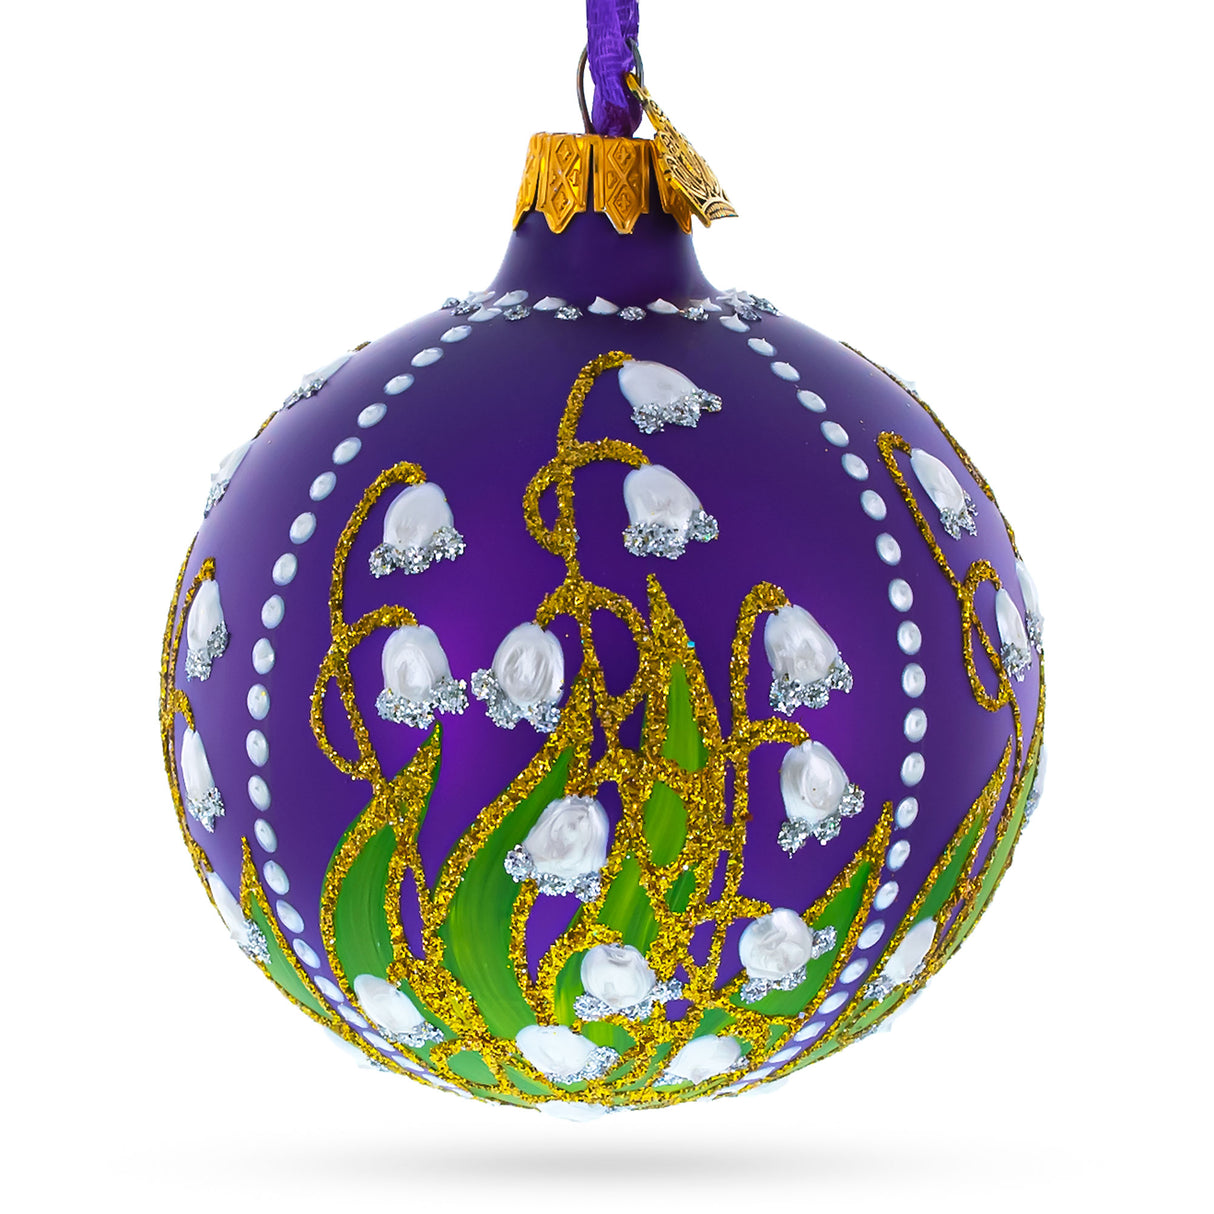 Glass Graceful Bloom: Lilies of the Valley on Purple Royal Blown Glass Ball Christmas Ornament 3.25 Inches in Purple color Round